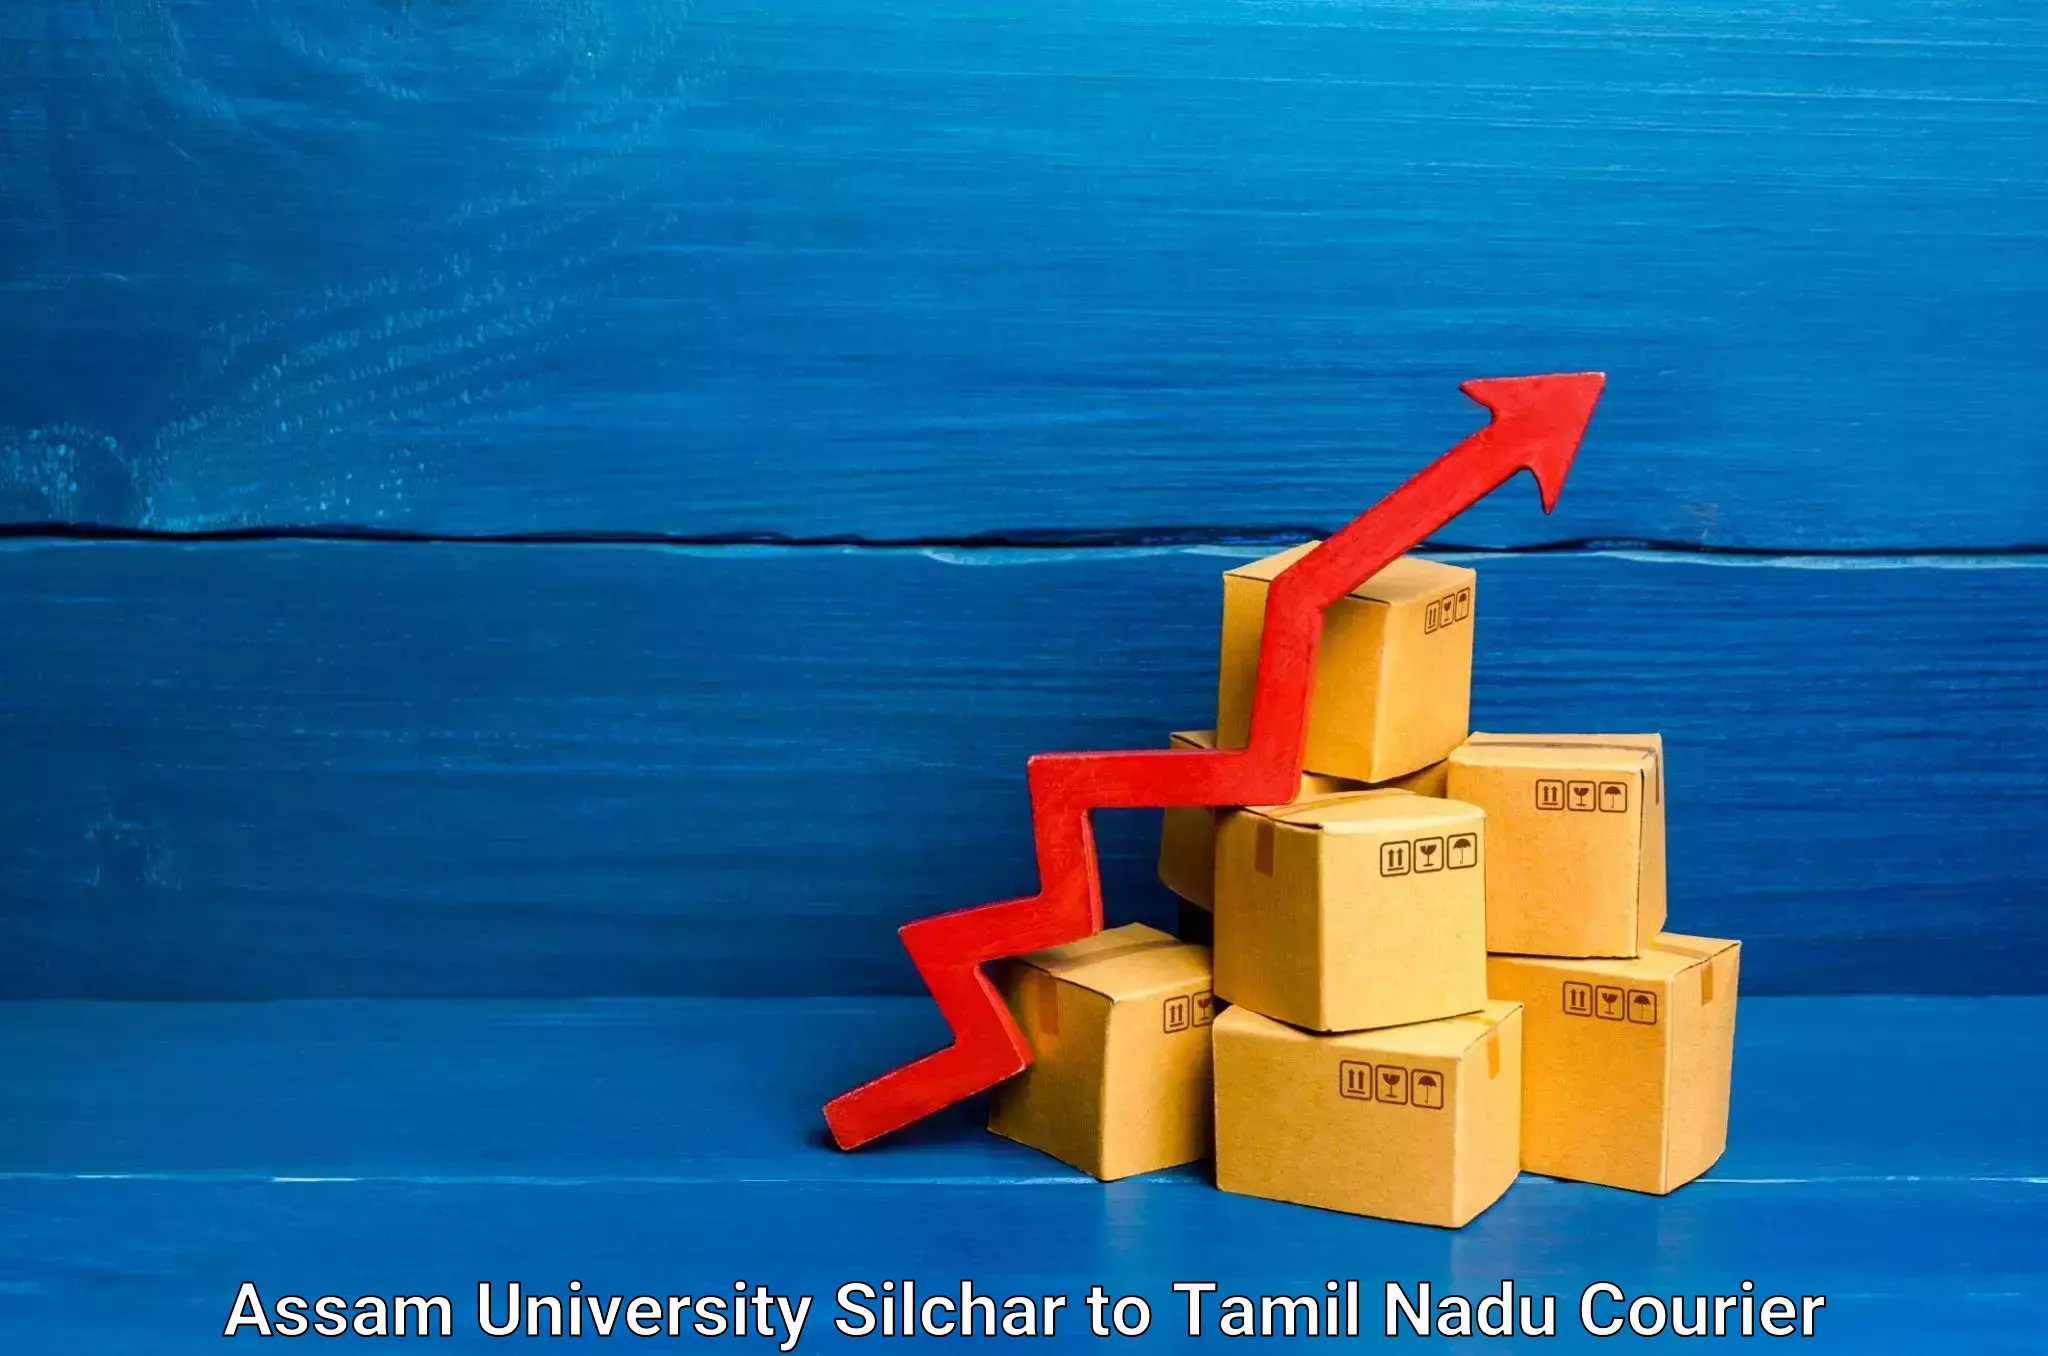 Full-service courier options Assam University Silchar to Dindigul